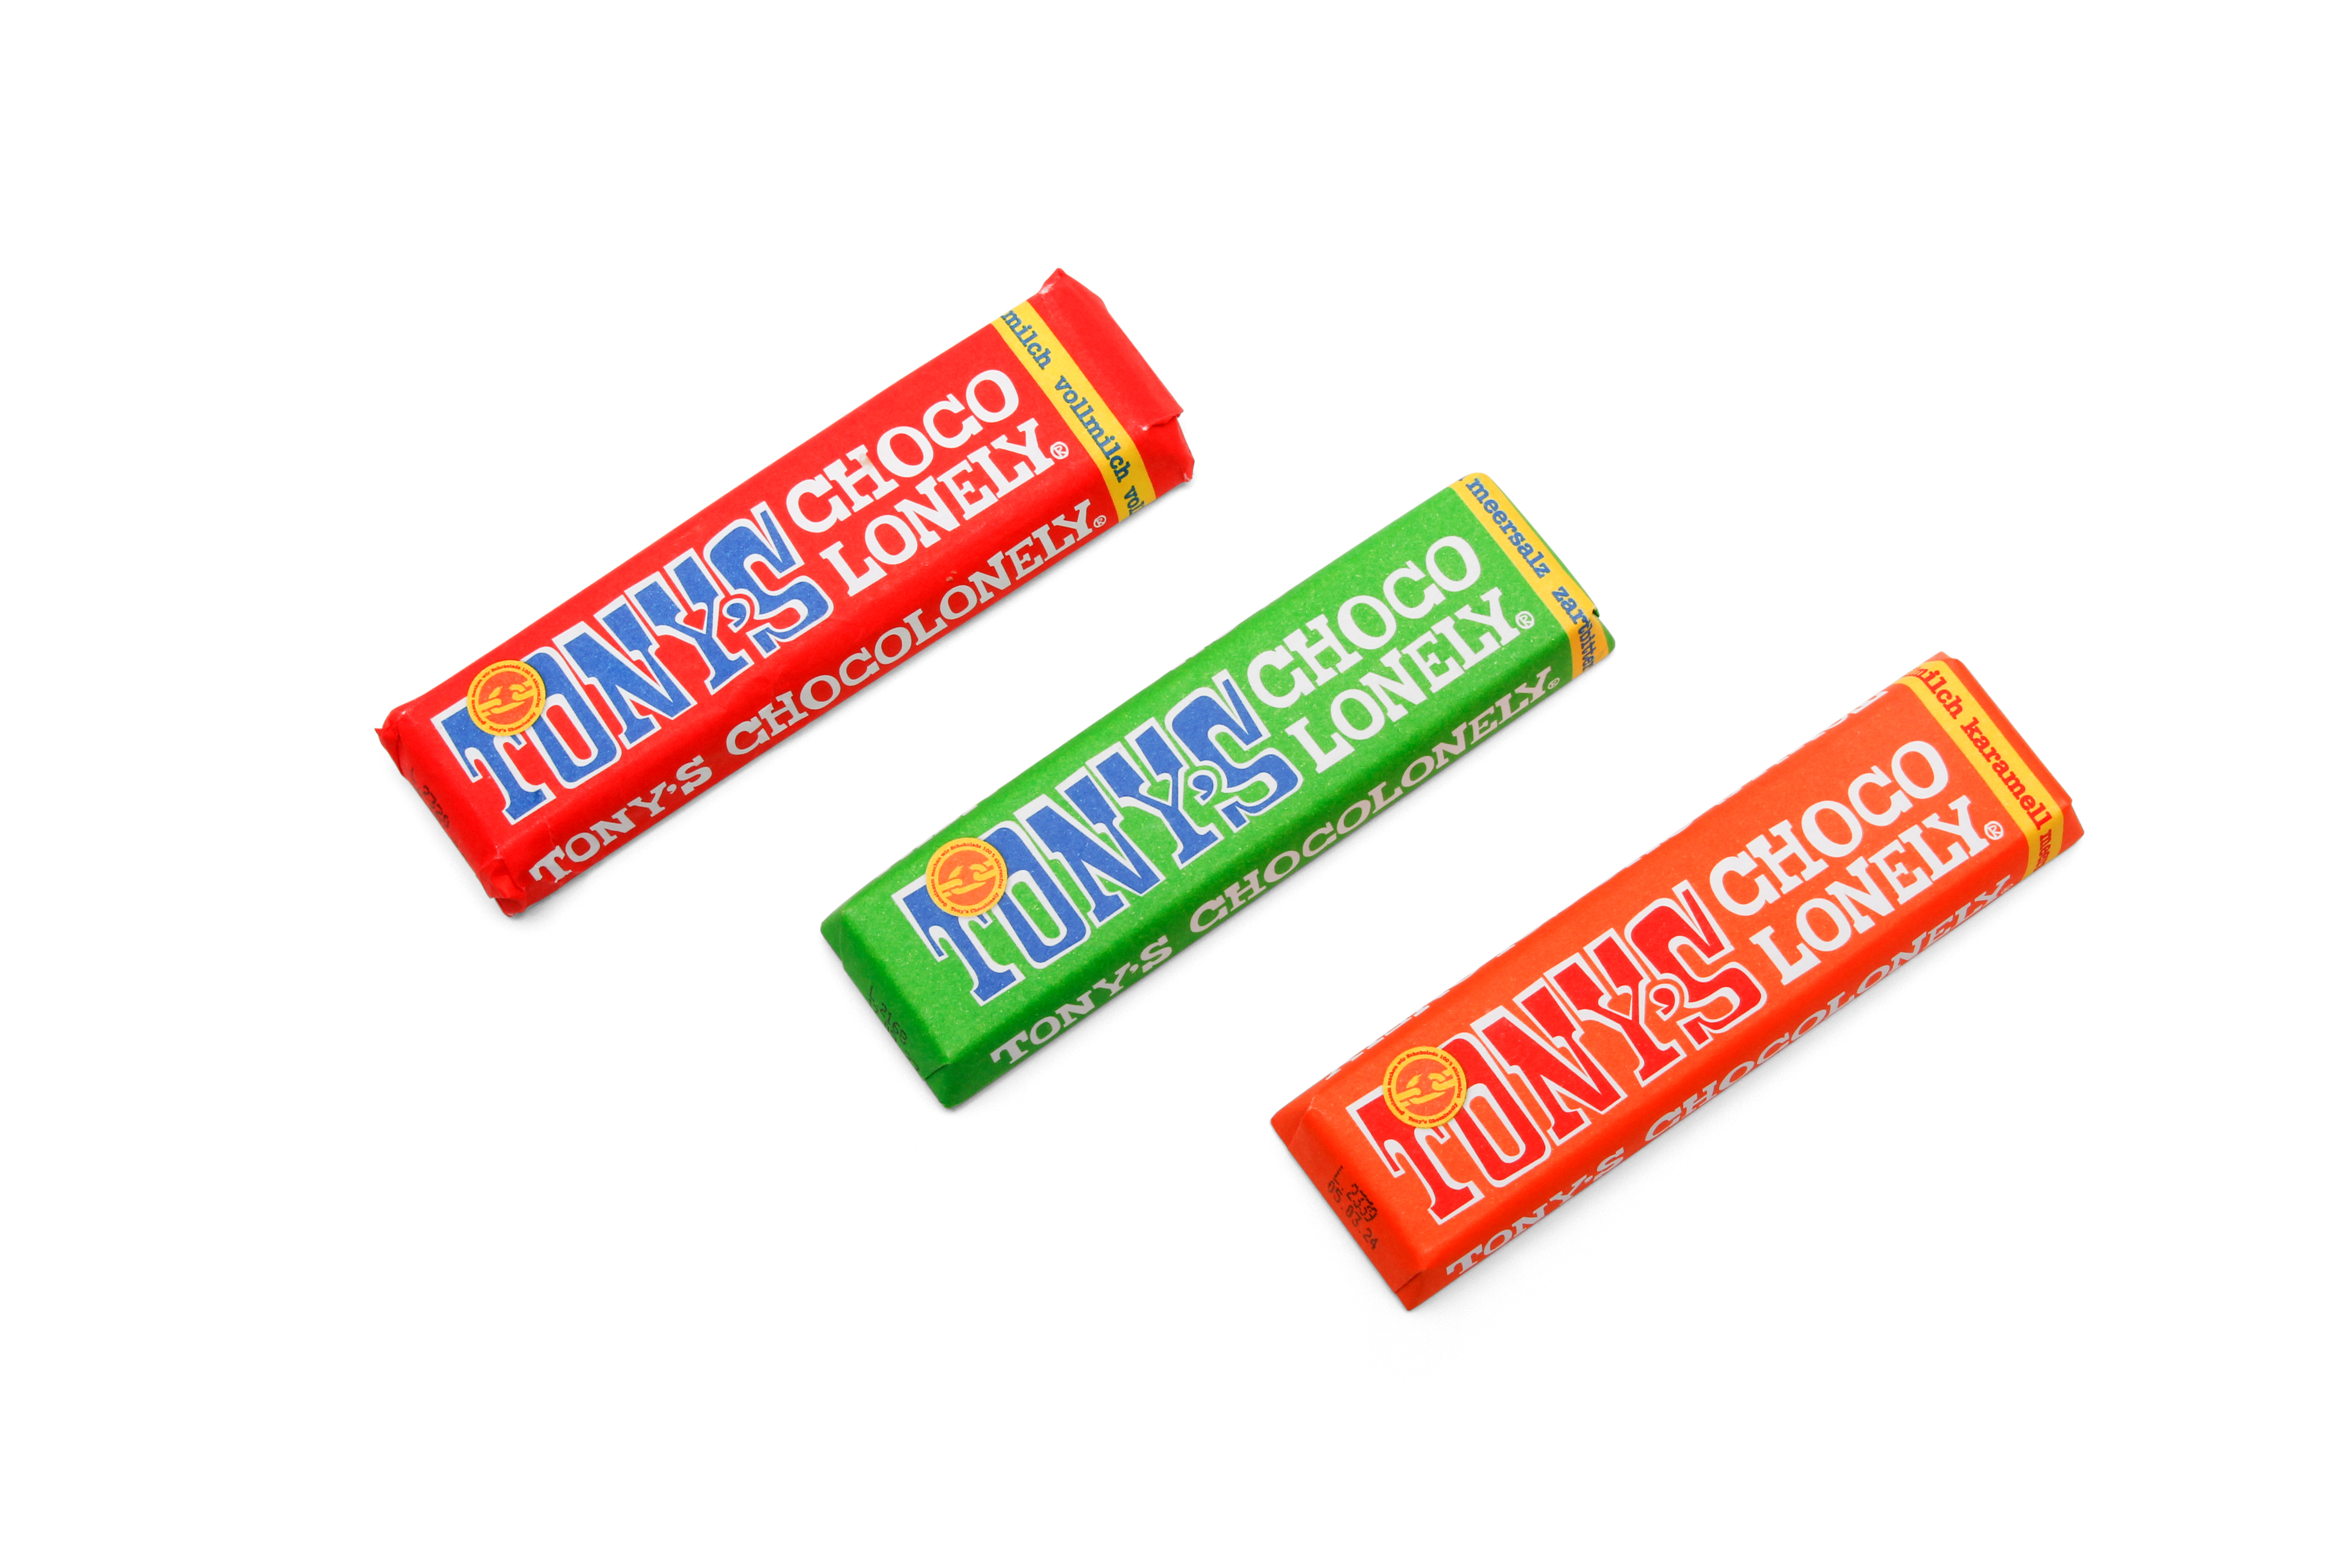 Sample Tony's Chocolonely Chocolate Bars with Promotional Sleeve